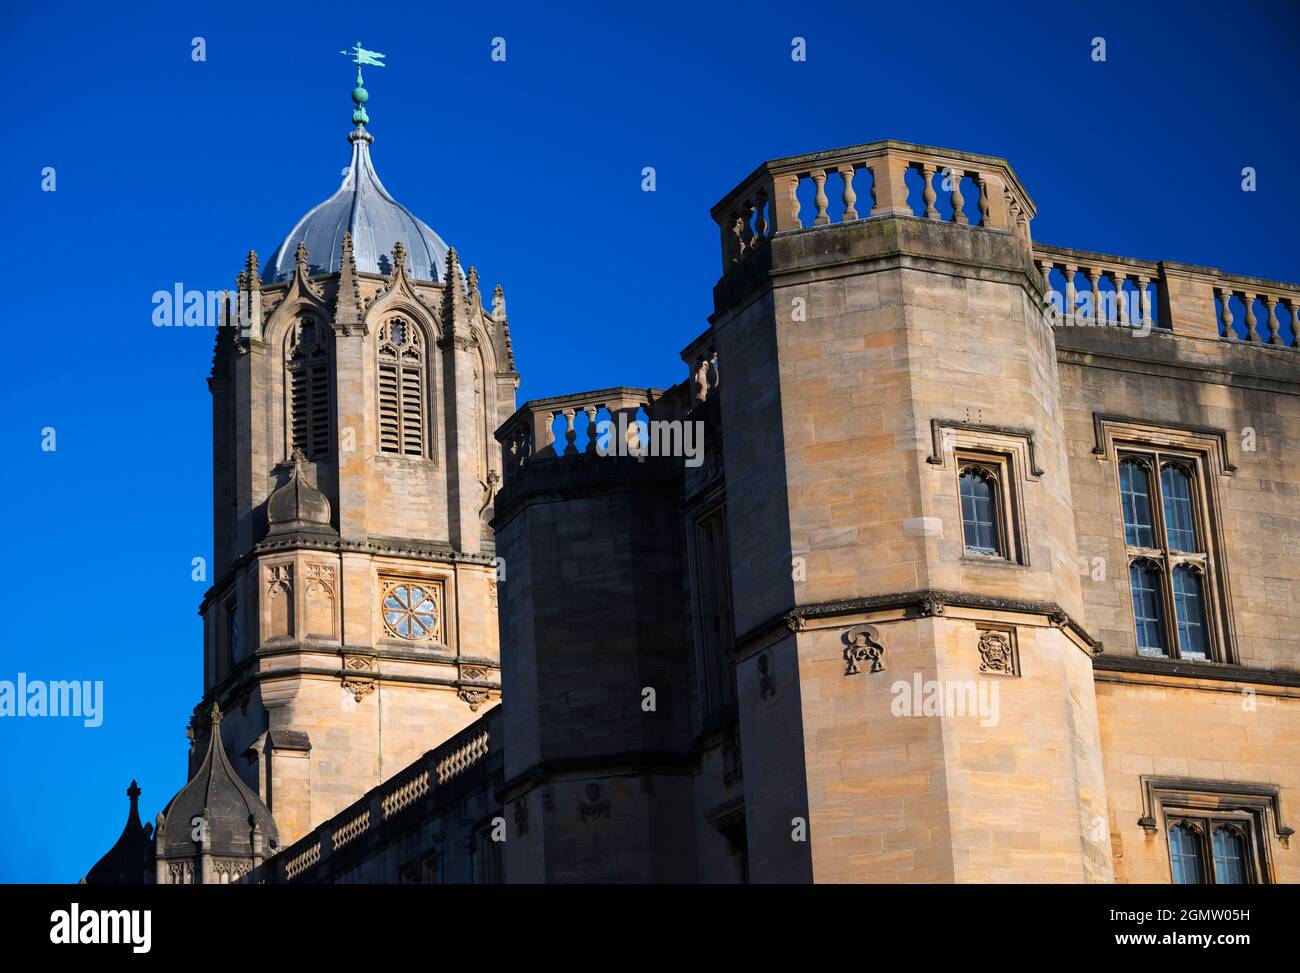 Oxford, England - 23 December 2019; Founded in 1525 by Thomas Wolsey, Lord Chancellor of England, Christ Church College remains one of the oldest, ric Stock Photo